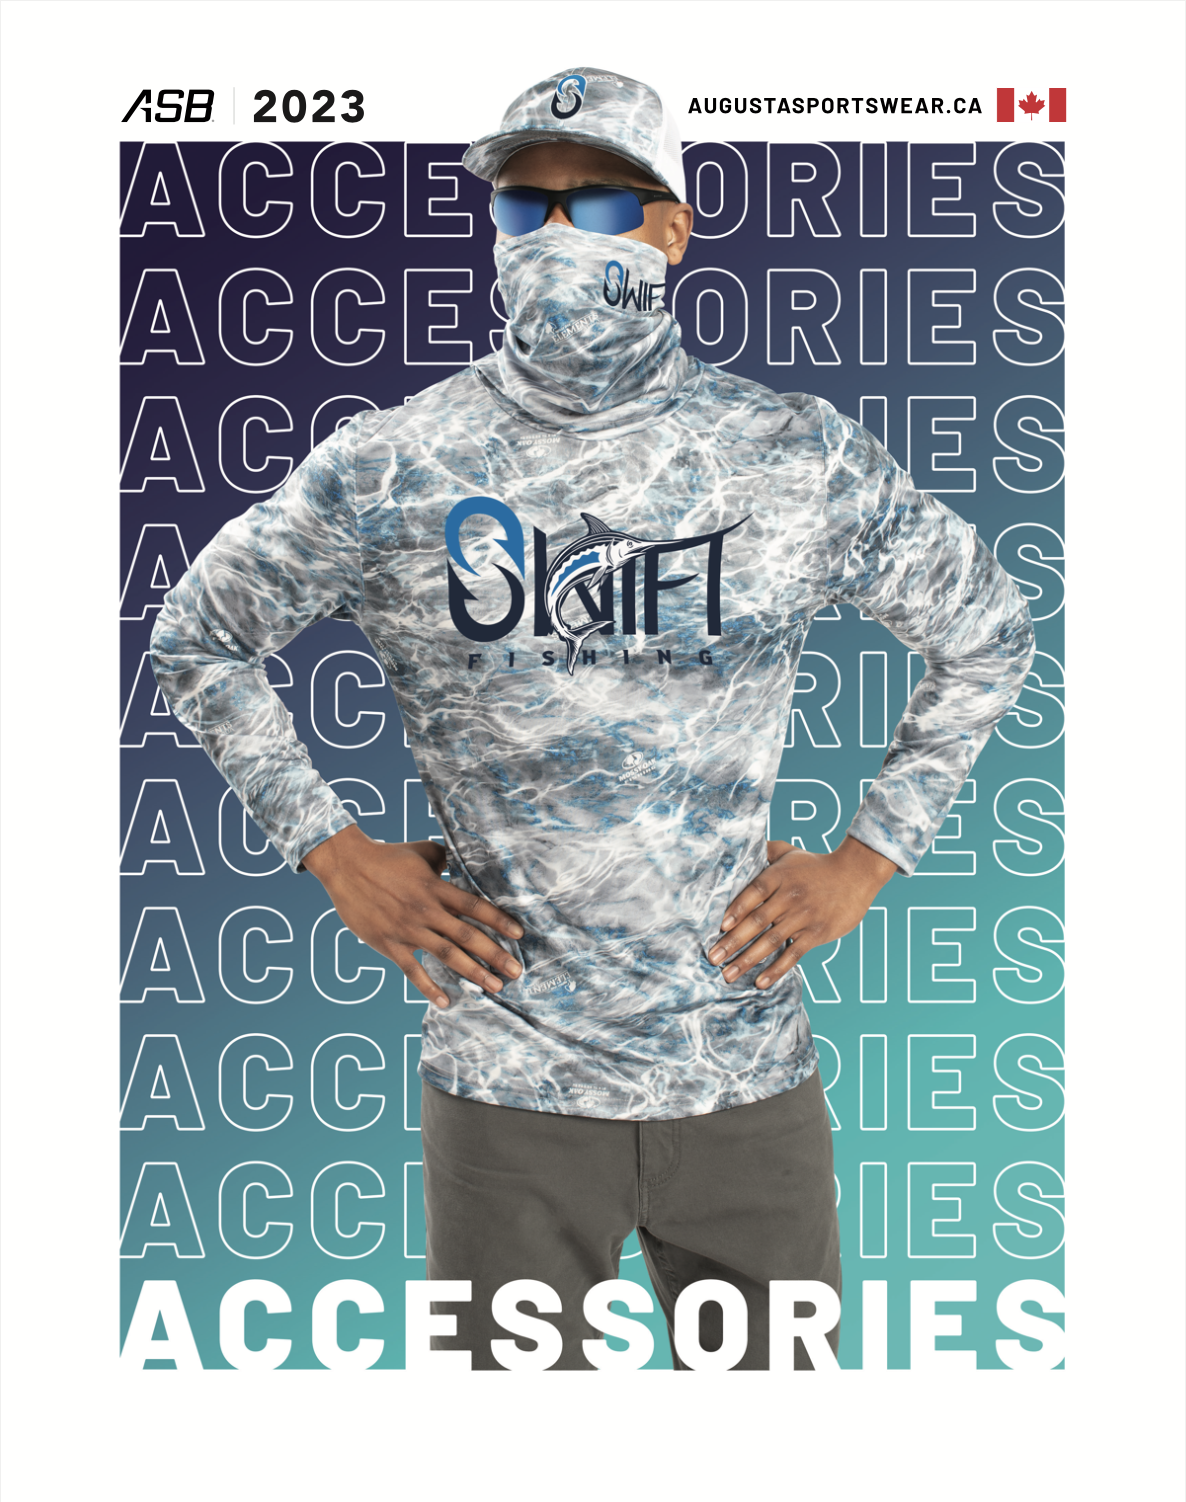 https://static.augustasportswear.com/marketing/Catalogs/2023/Canada/CAD_Accessories_May_2023_web.png